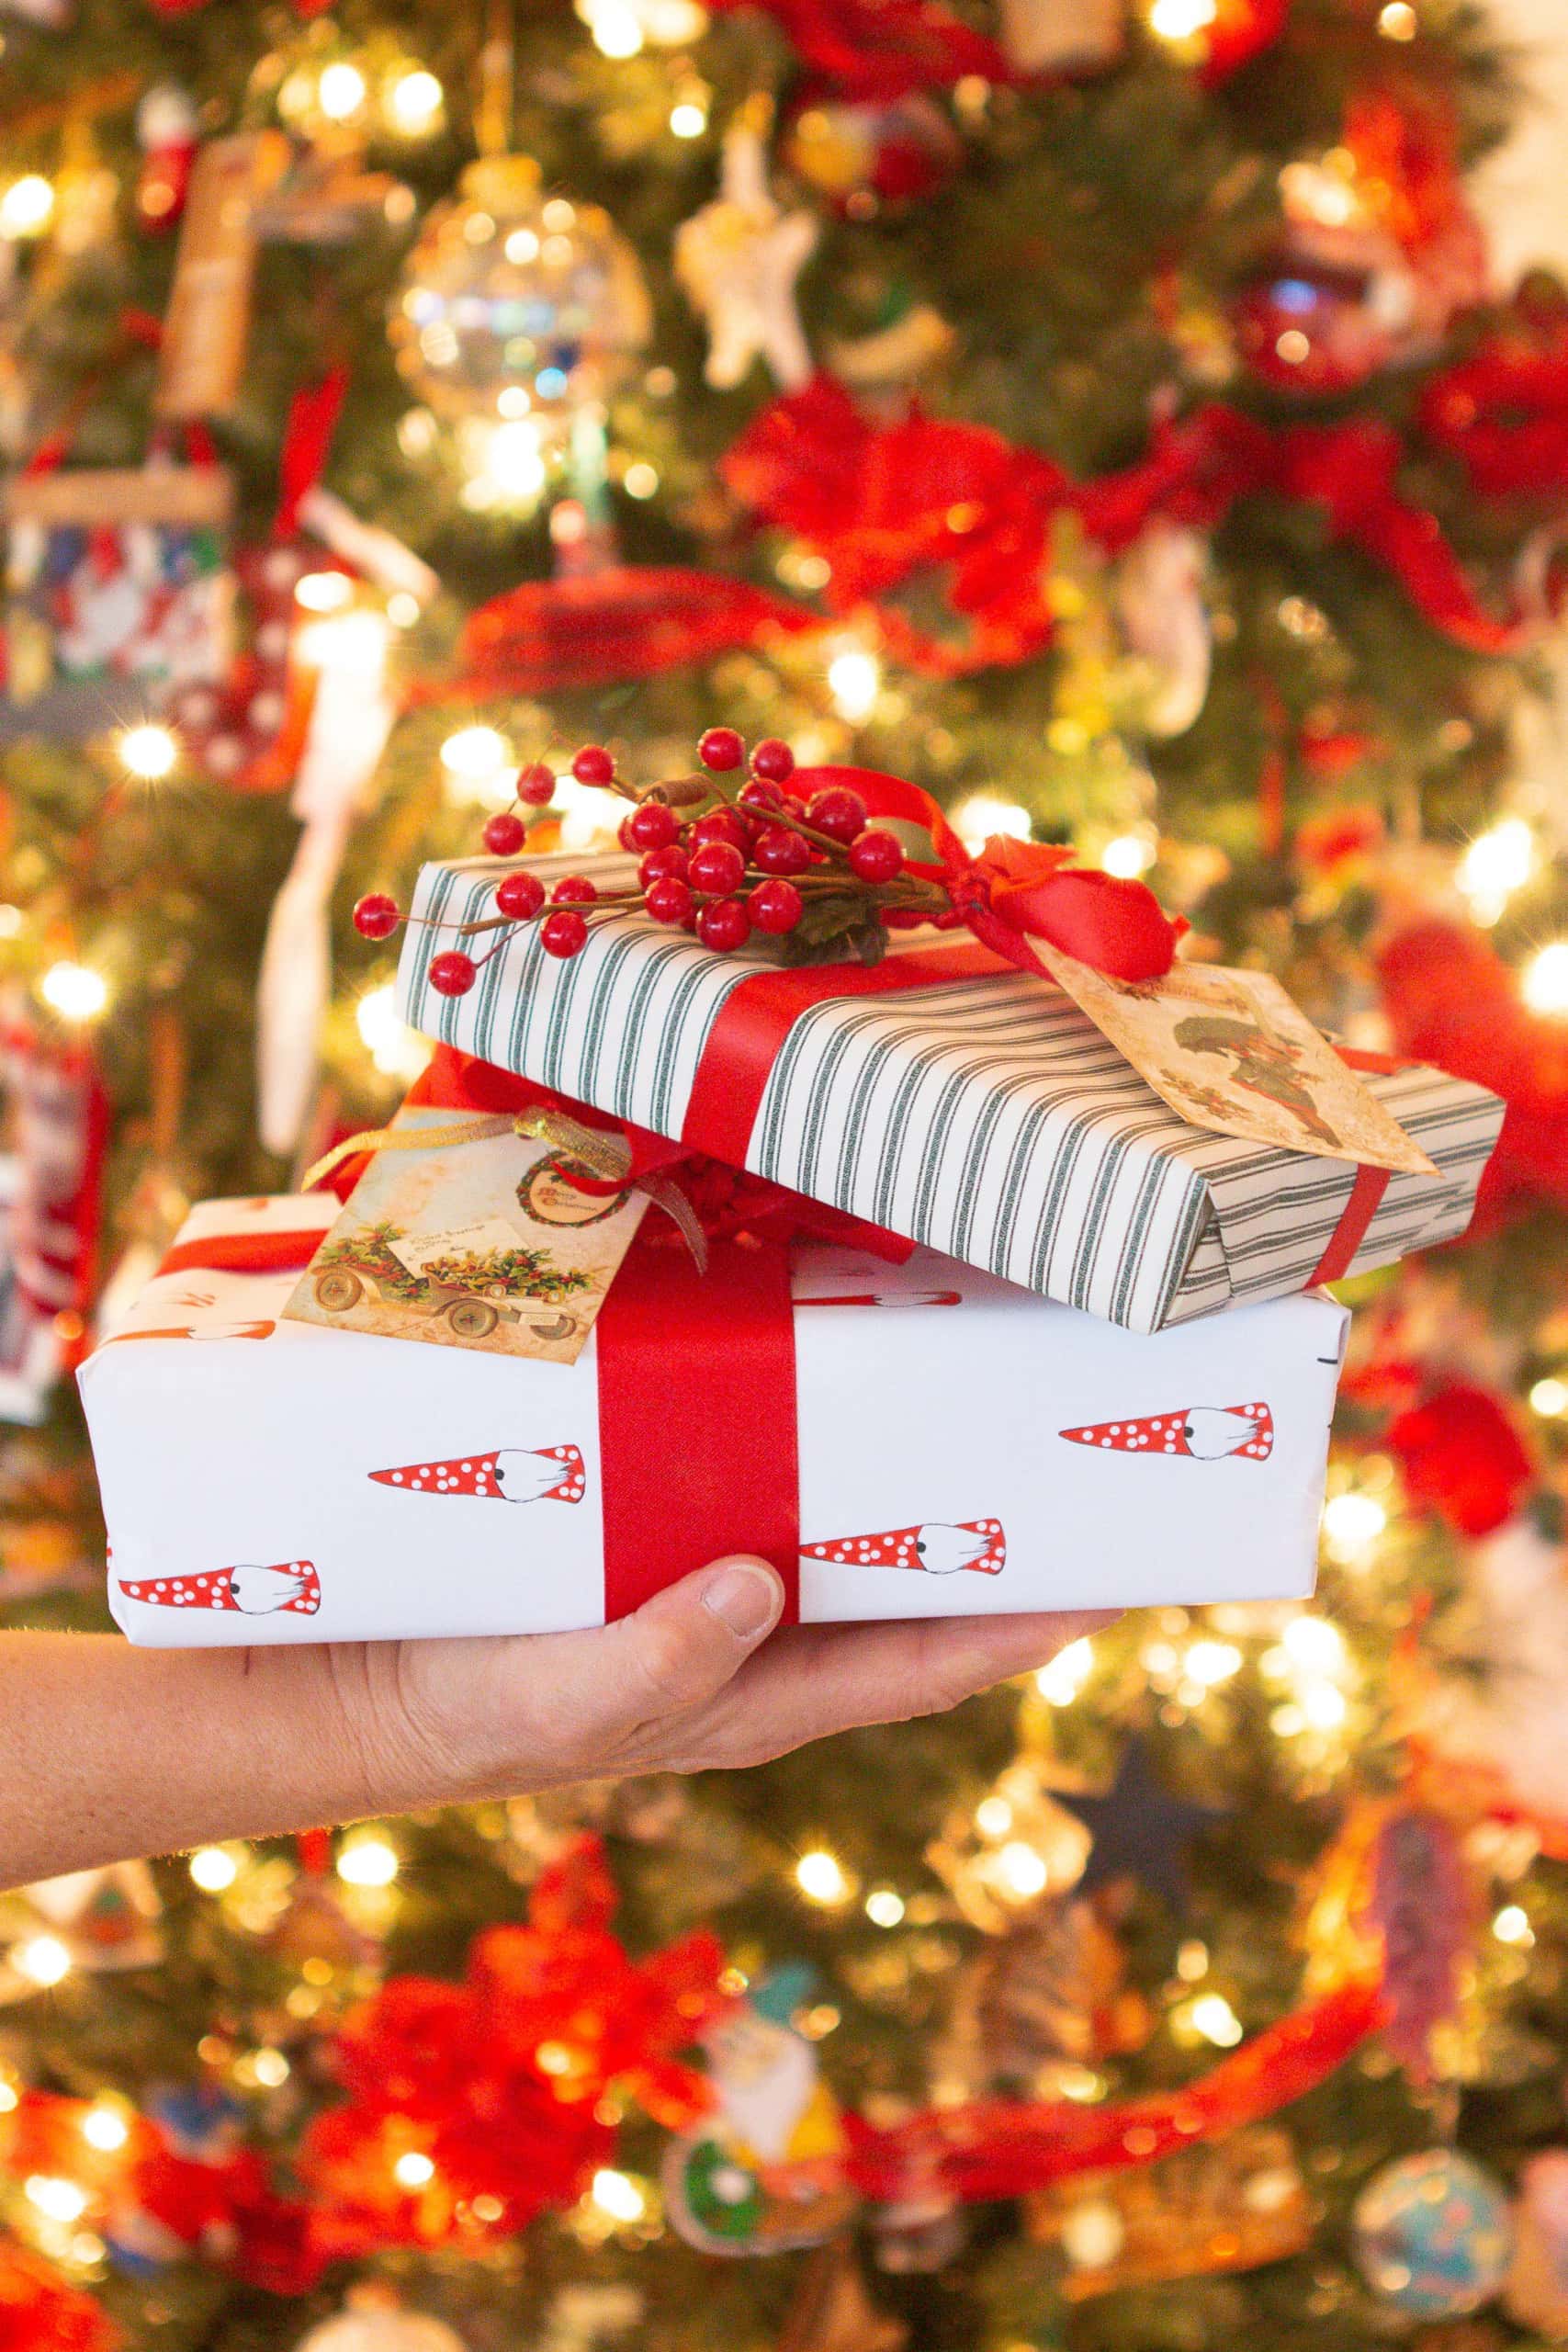 Tips to wrap gifts this holiday season